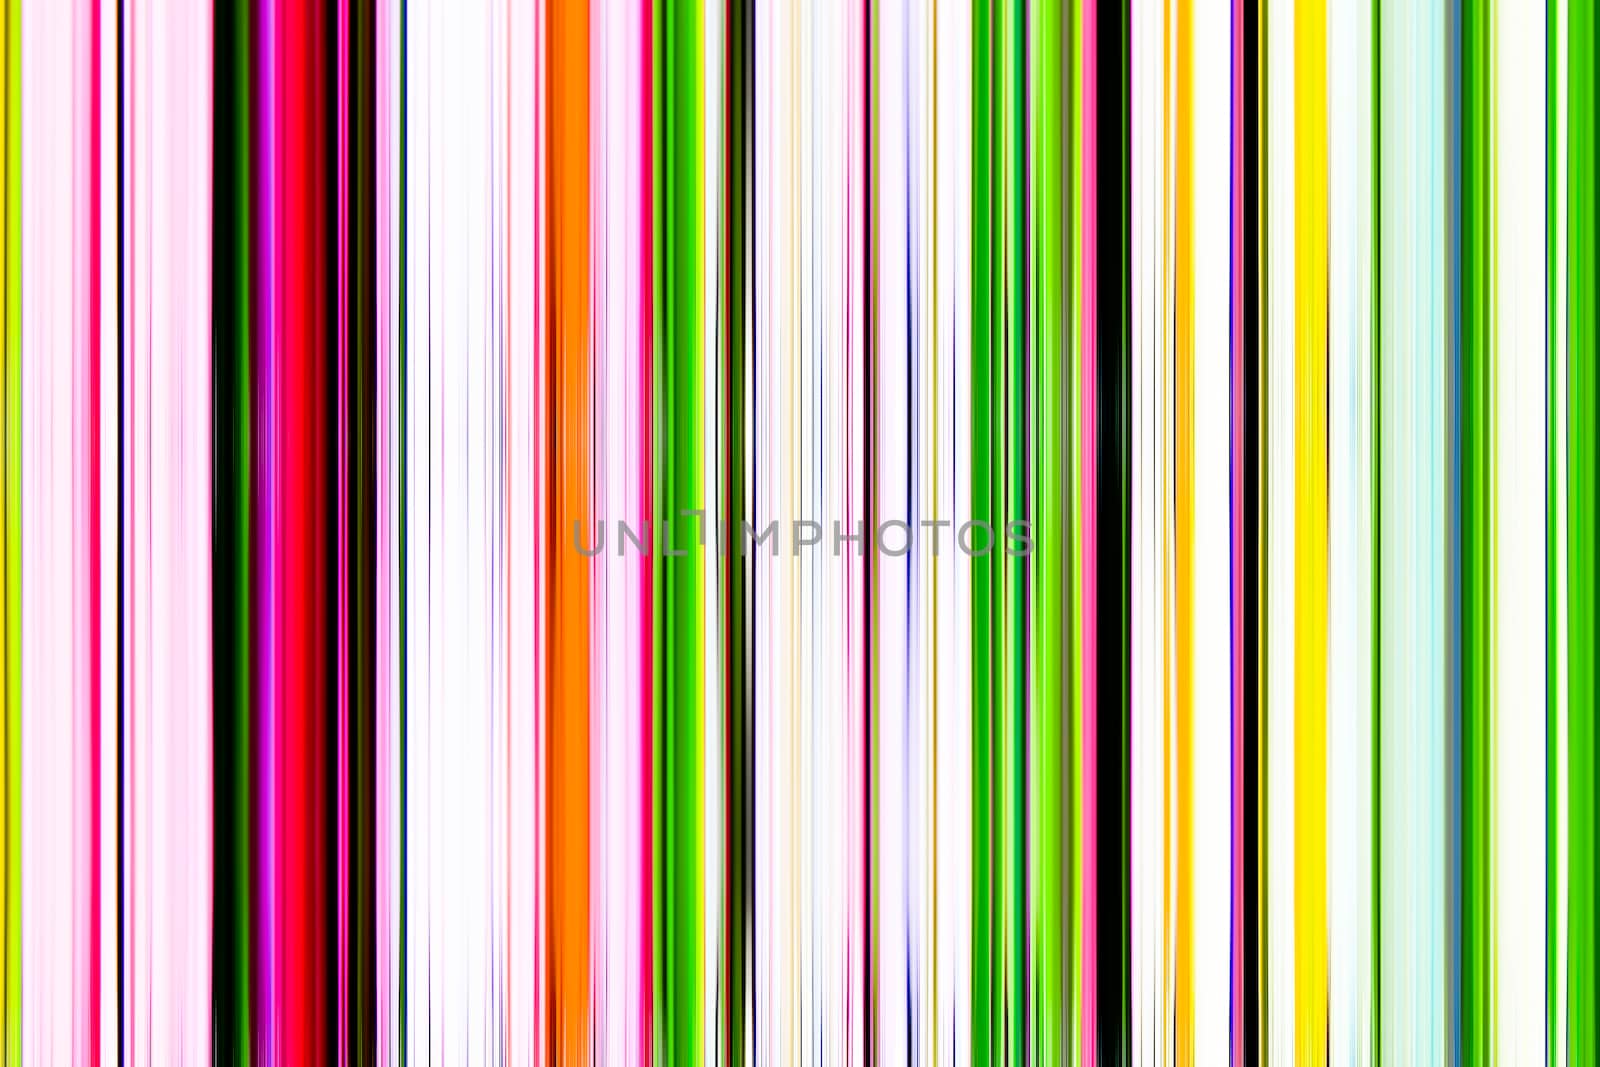 Abtrract of color  line background  by nitimongkolchai